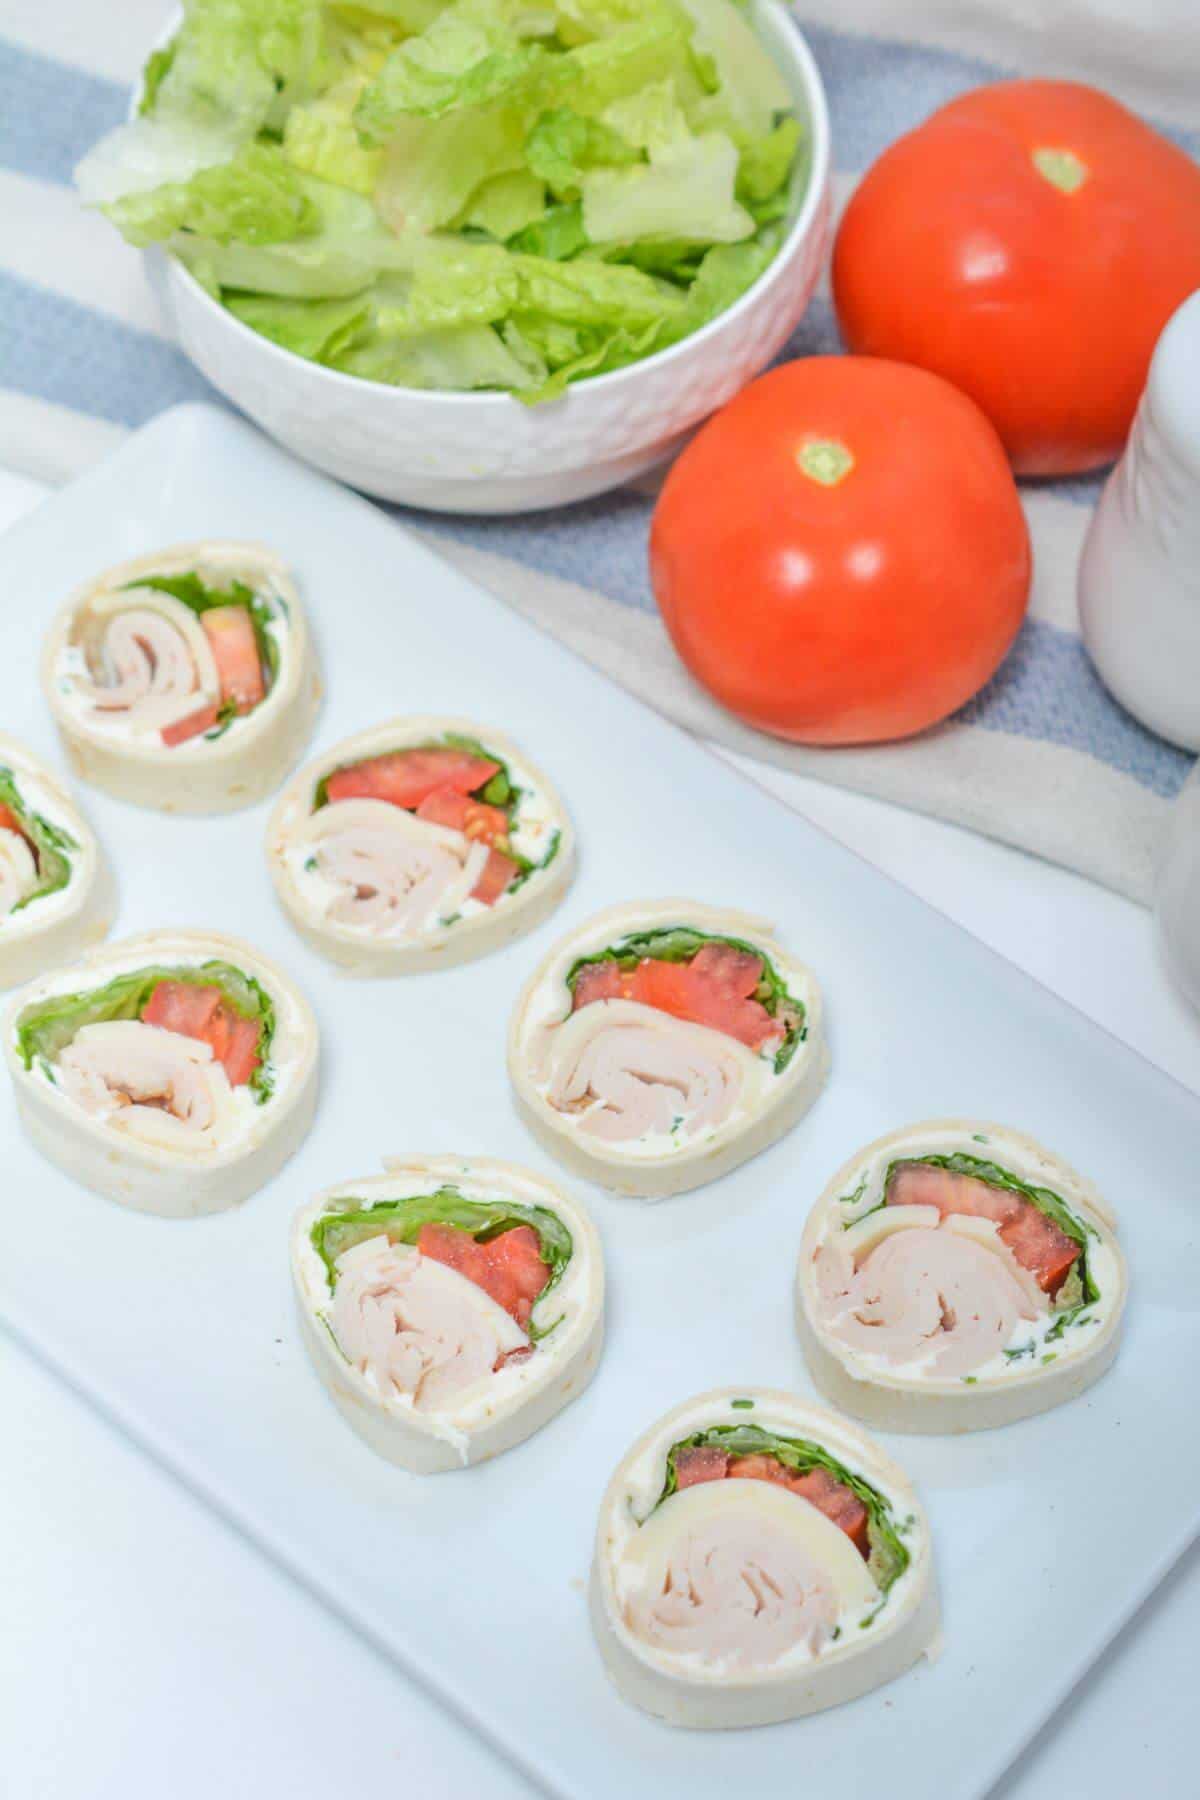 A white plate with a tray of chicken and tomato wraps.